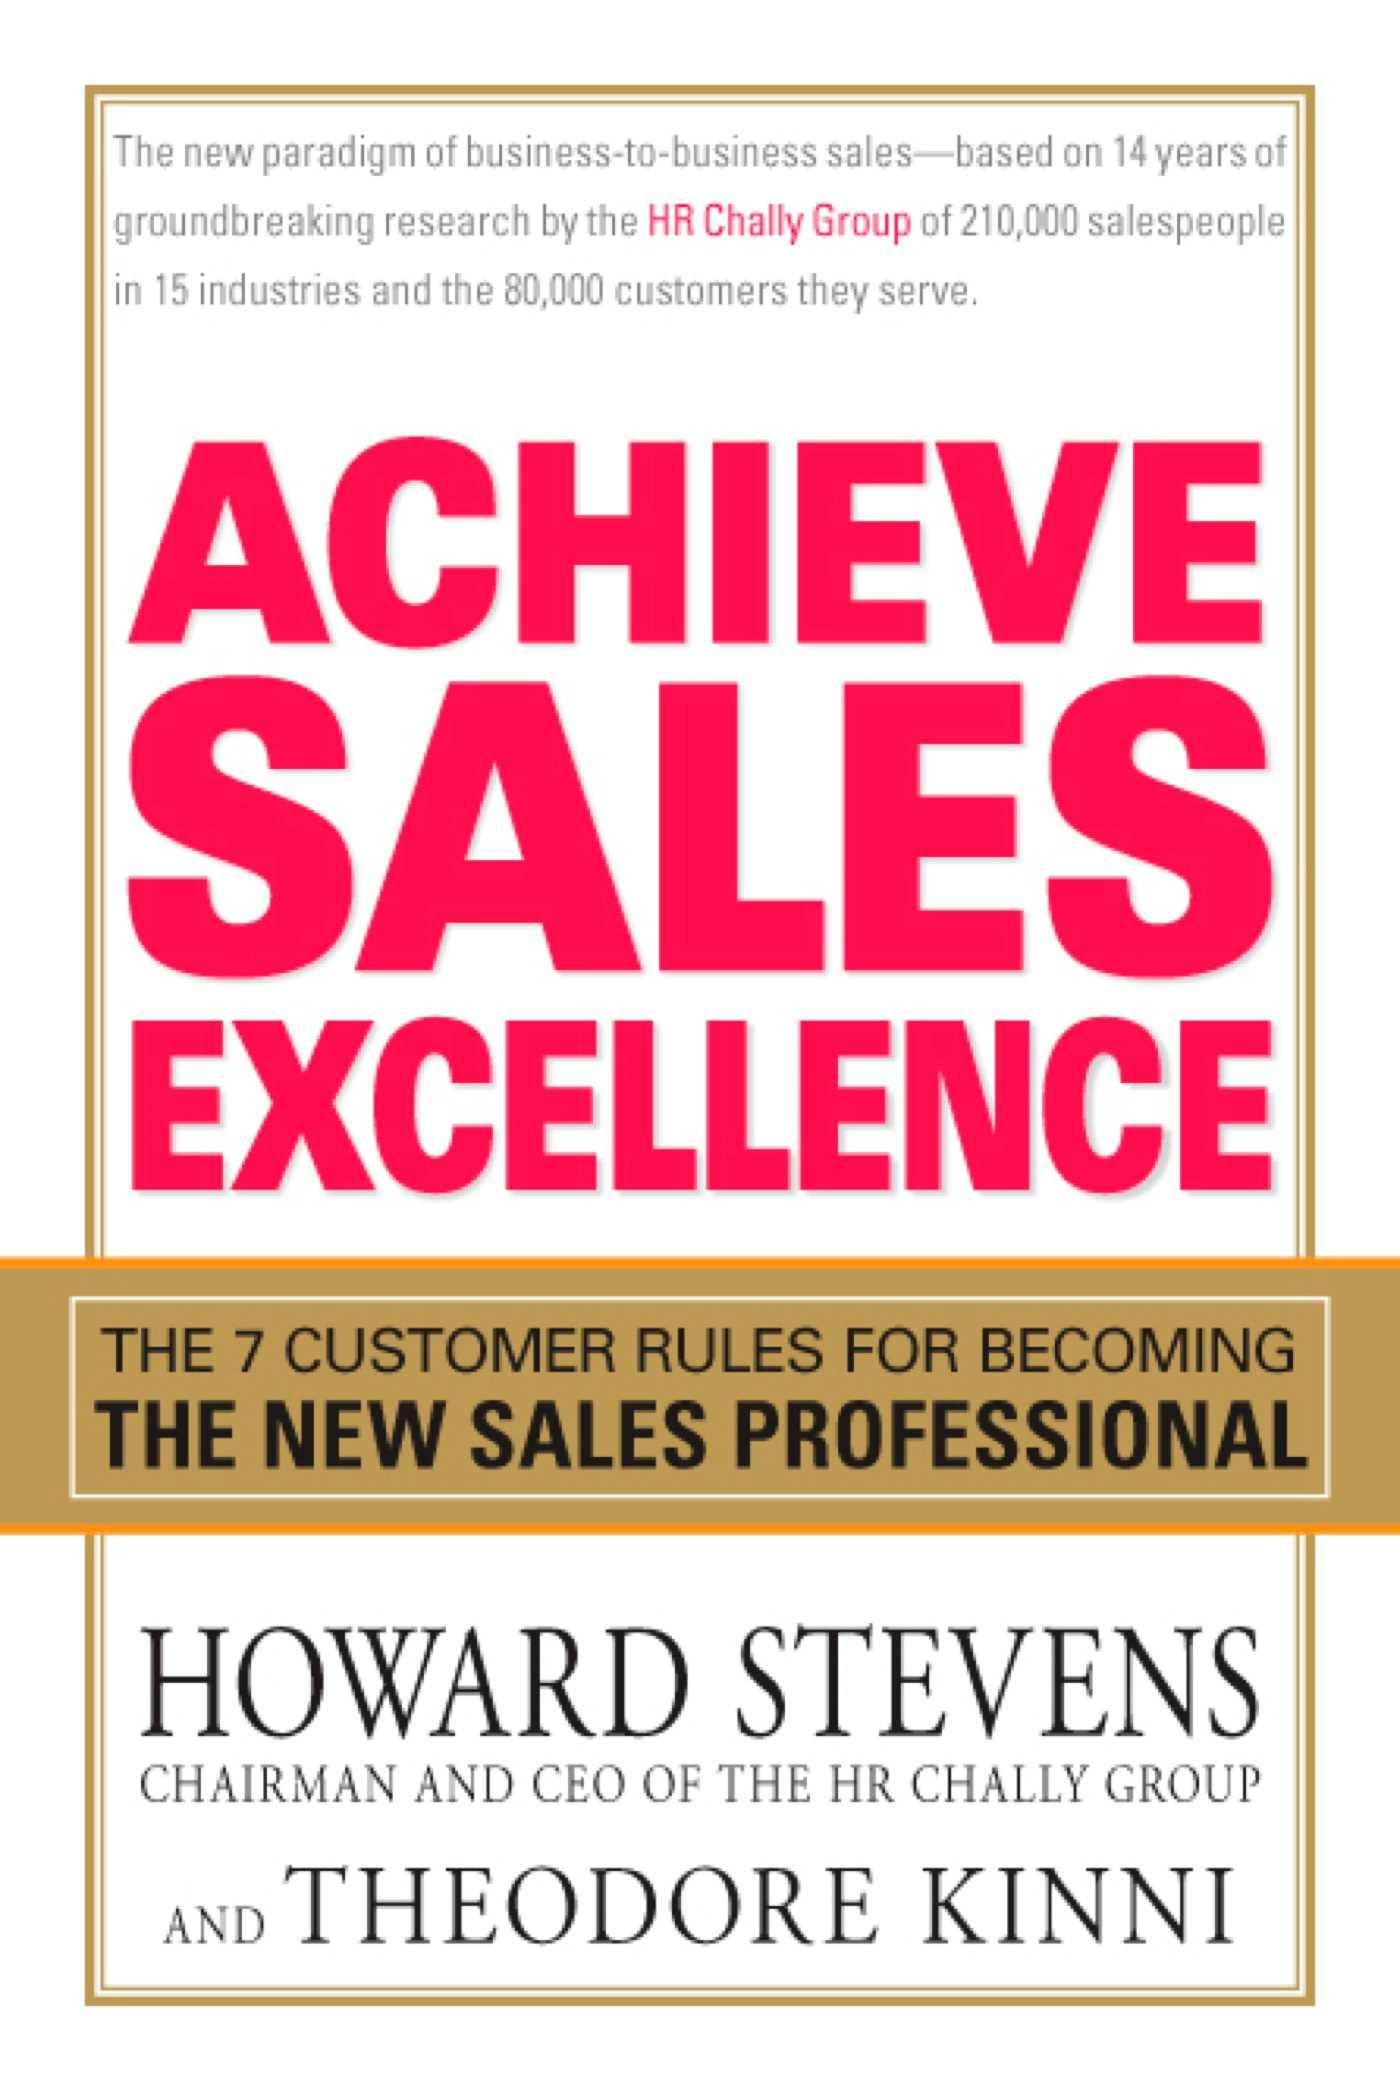 Achieve Sales Excellence: The 7 Customer Rules for Becoming the New Sales Professional - Theodore Kinni, Howard Stevens